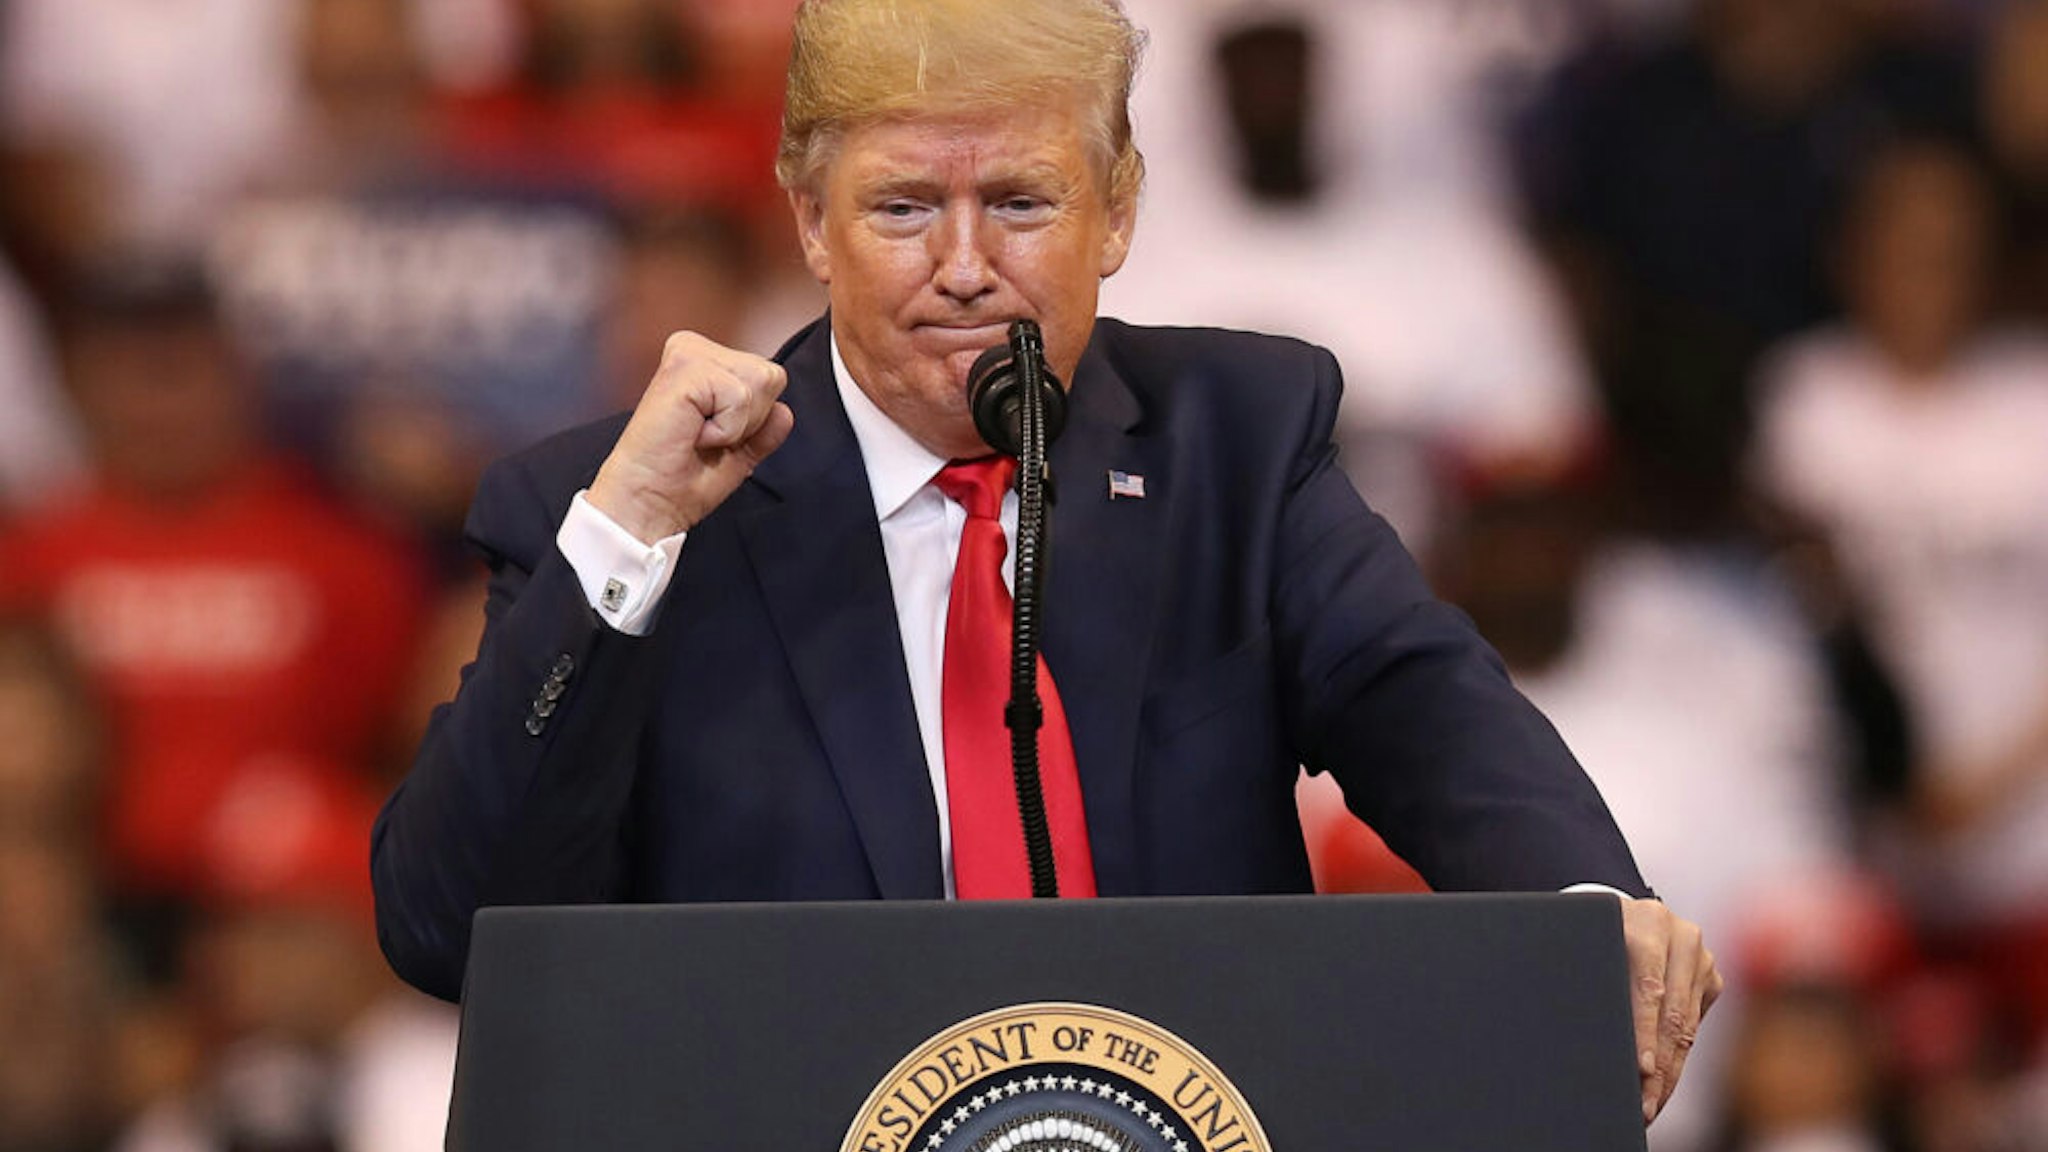 SUNRISE, FLORIDA - NOVEMBER 26: U.S. President Donald Trump speaks during a homecoming campaign rally at the BB&amp;T Center on November 26, 2019 in Sunrise, Florida. President Trump continues to campaign for re-election in the 2020 presidential race.